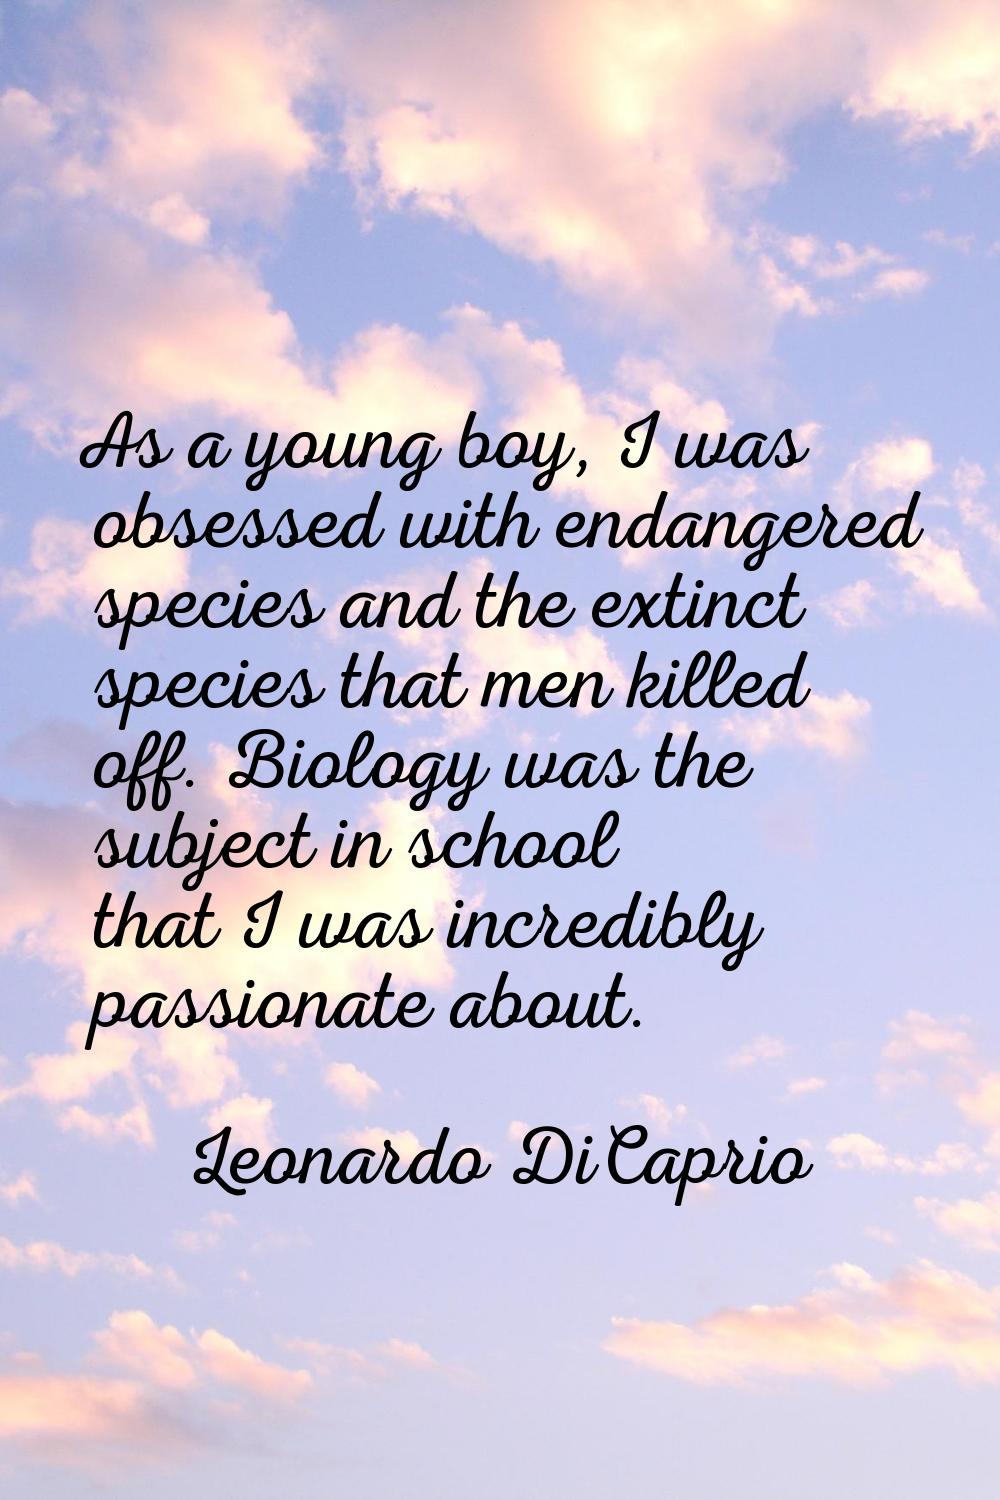 As a young boy, I was obsessed with endangered species and the extinct species that men killed off.